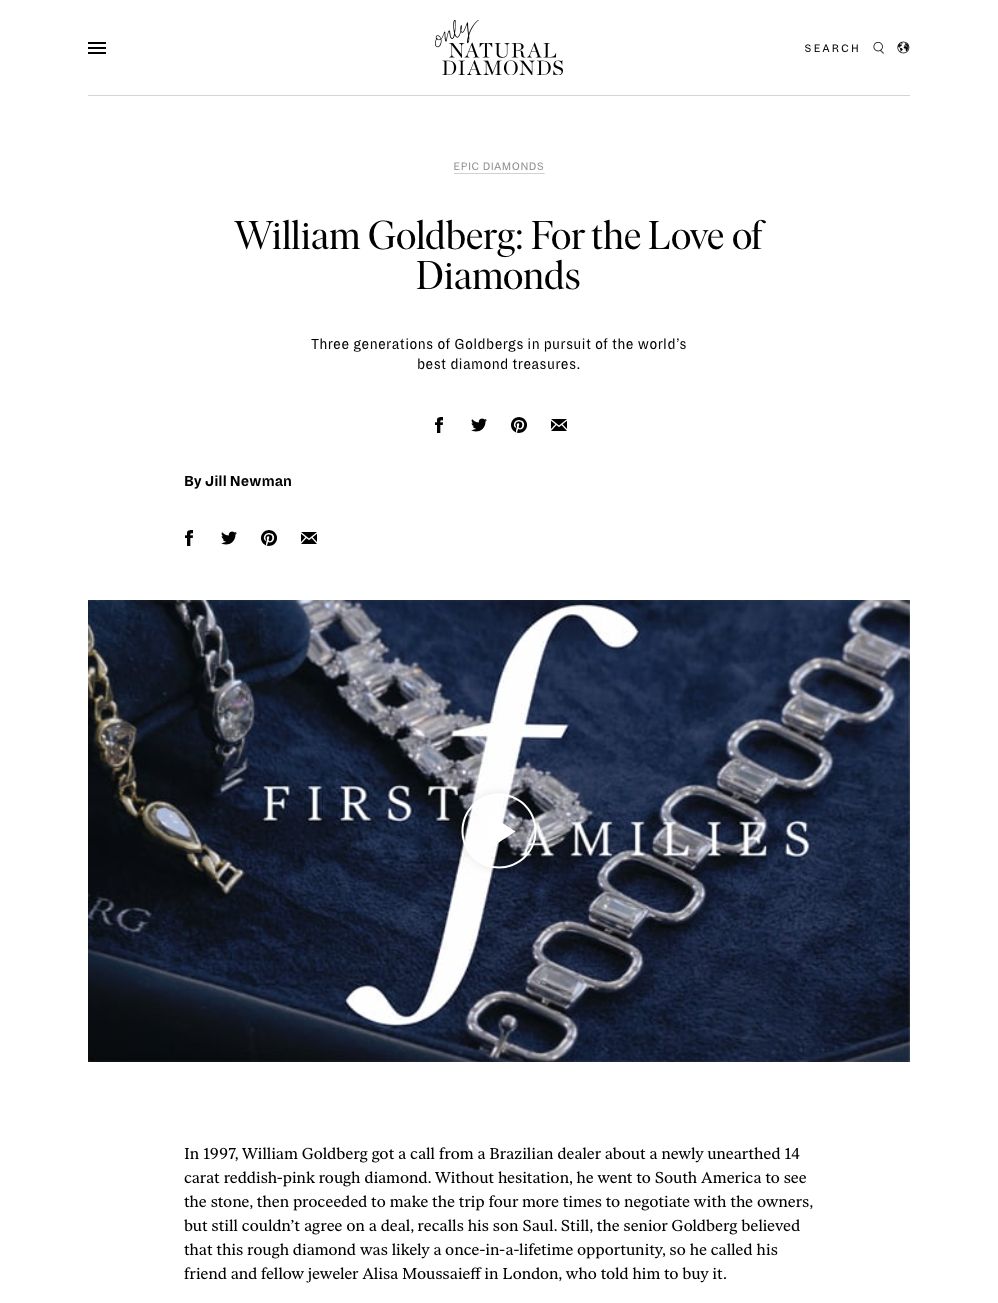 Only Natural Diamonds First Families William Goldberg